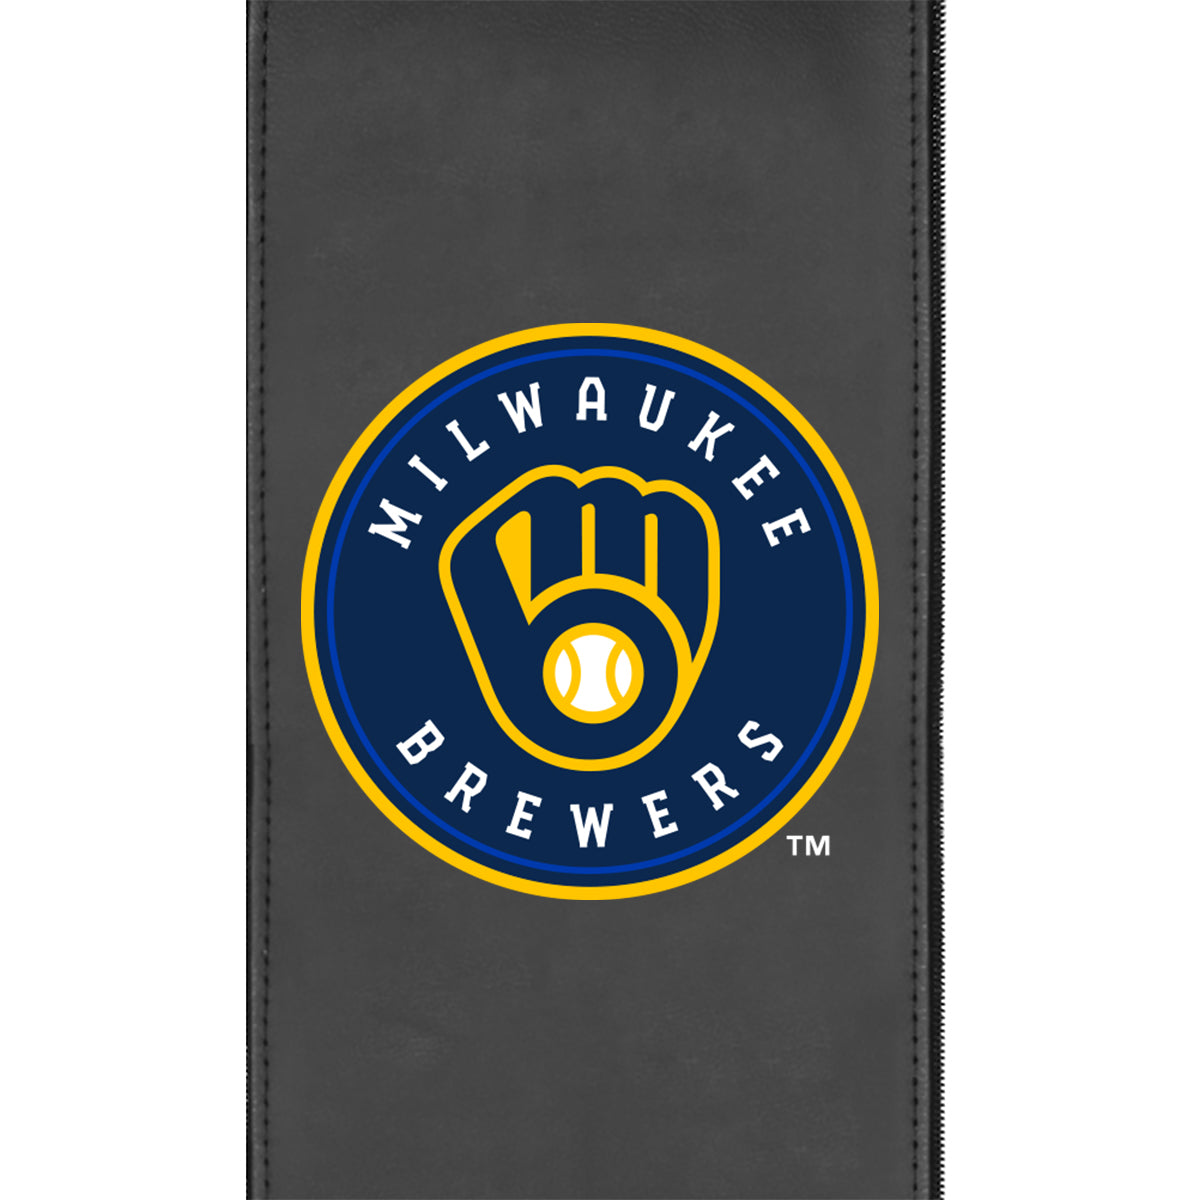 Silver Loveseat with Milwaukee Brewers Primary Logo